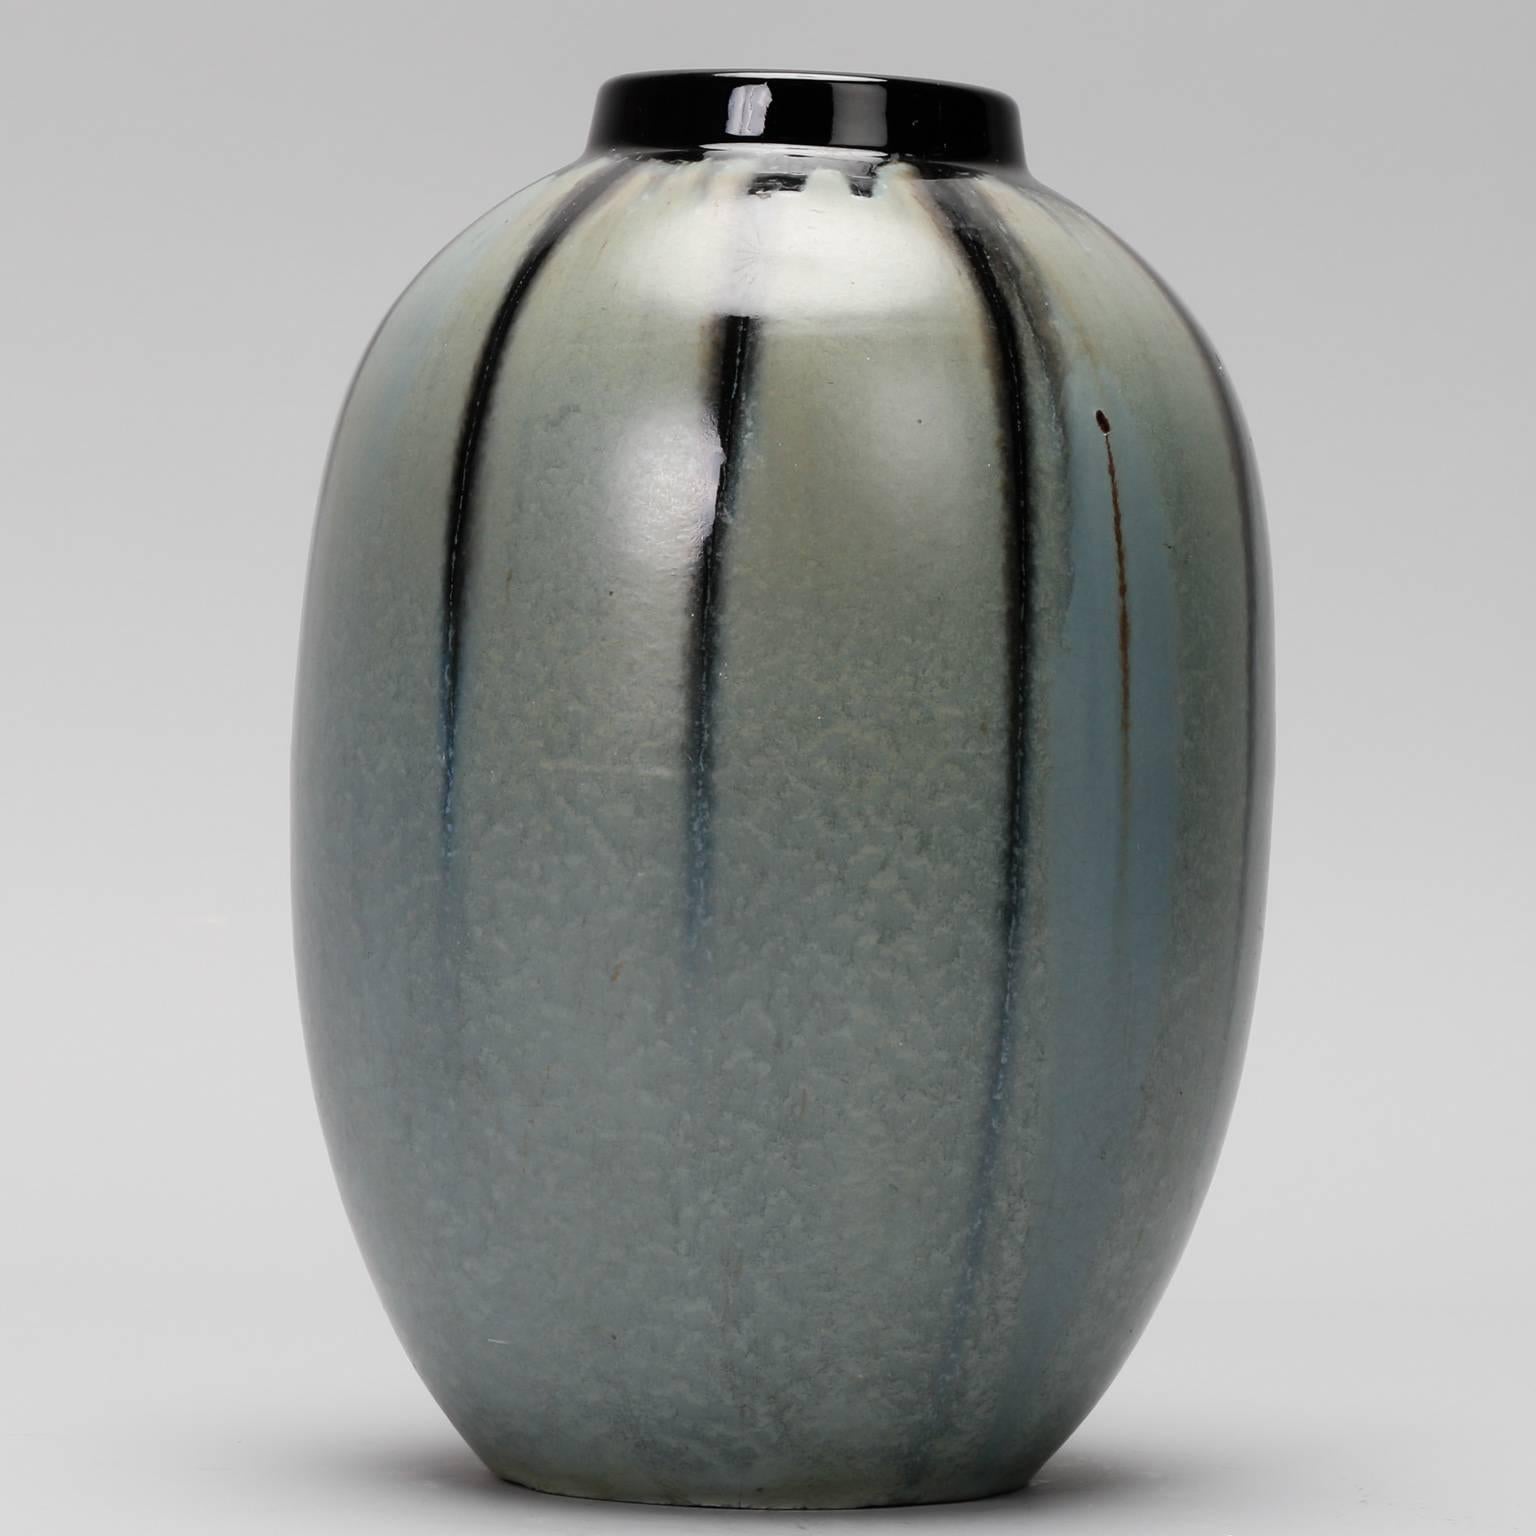 Blue grey ceramic vessel with black drip accents by Thulin of Belgium dates from 1920s.
 